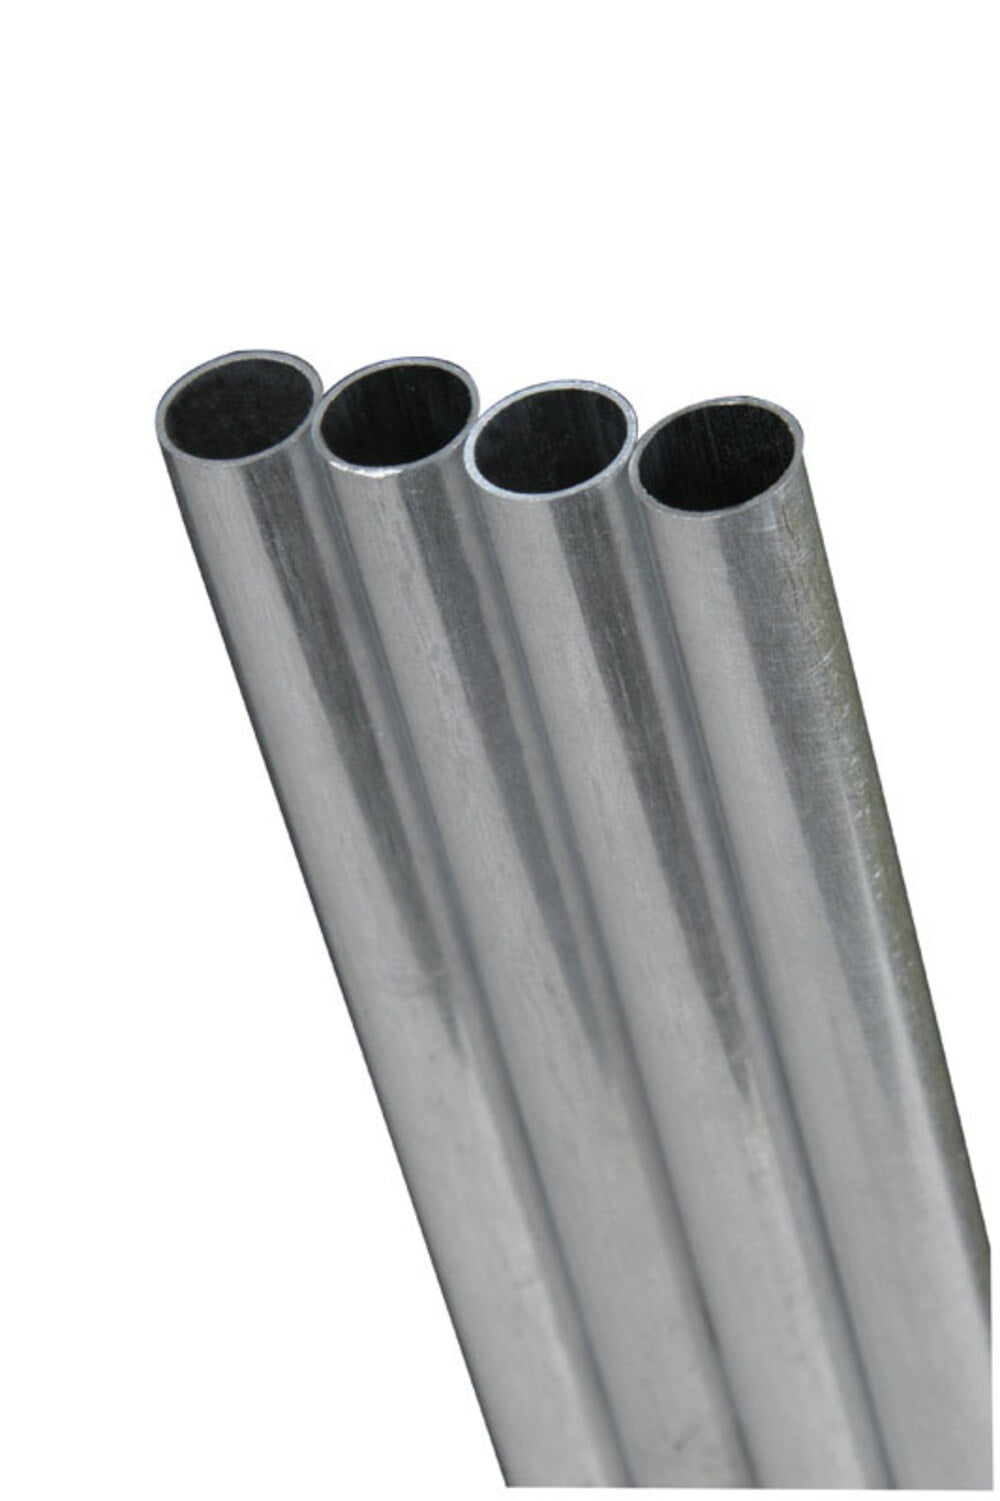 2 Schedule 40 x 12 Long Alloy 304 Stainless Steel Pipe Qty of 1 